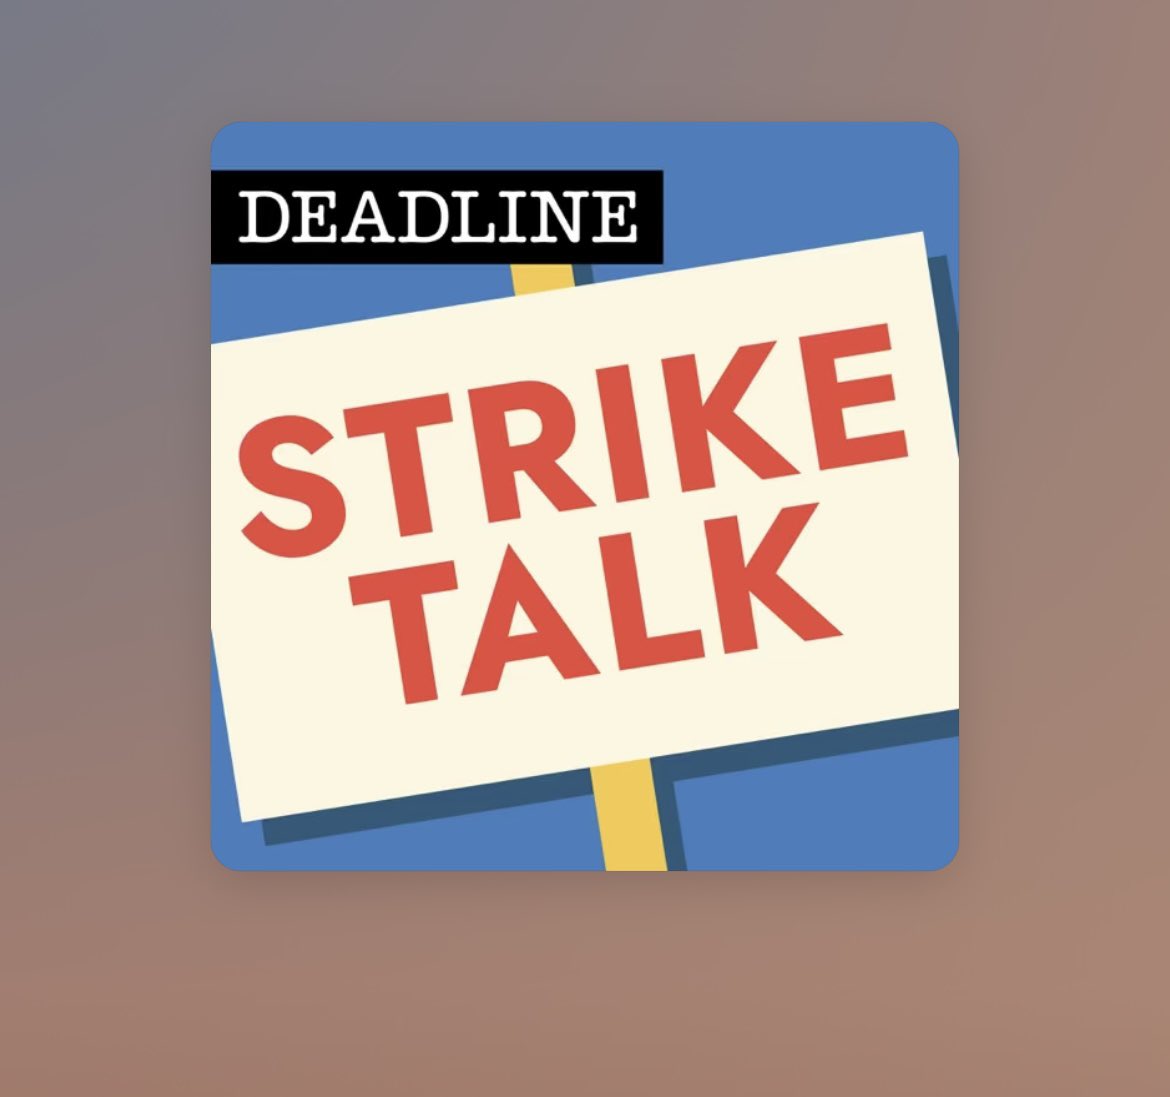 Billy Ray & Todd Garner’s STRIKE TALK is back with an interview w/ Teamsters-head Lindsay Dougherty and an important update on crew negotiations w/ the AMPTP—

If you hoped the CEOs and Carol Lombardini learned a lesson, you gotta listen.

@BillyRay5229 @Todd_Garner @LindsayD399